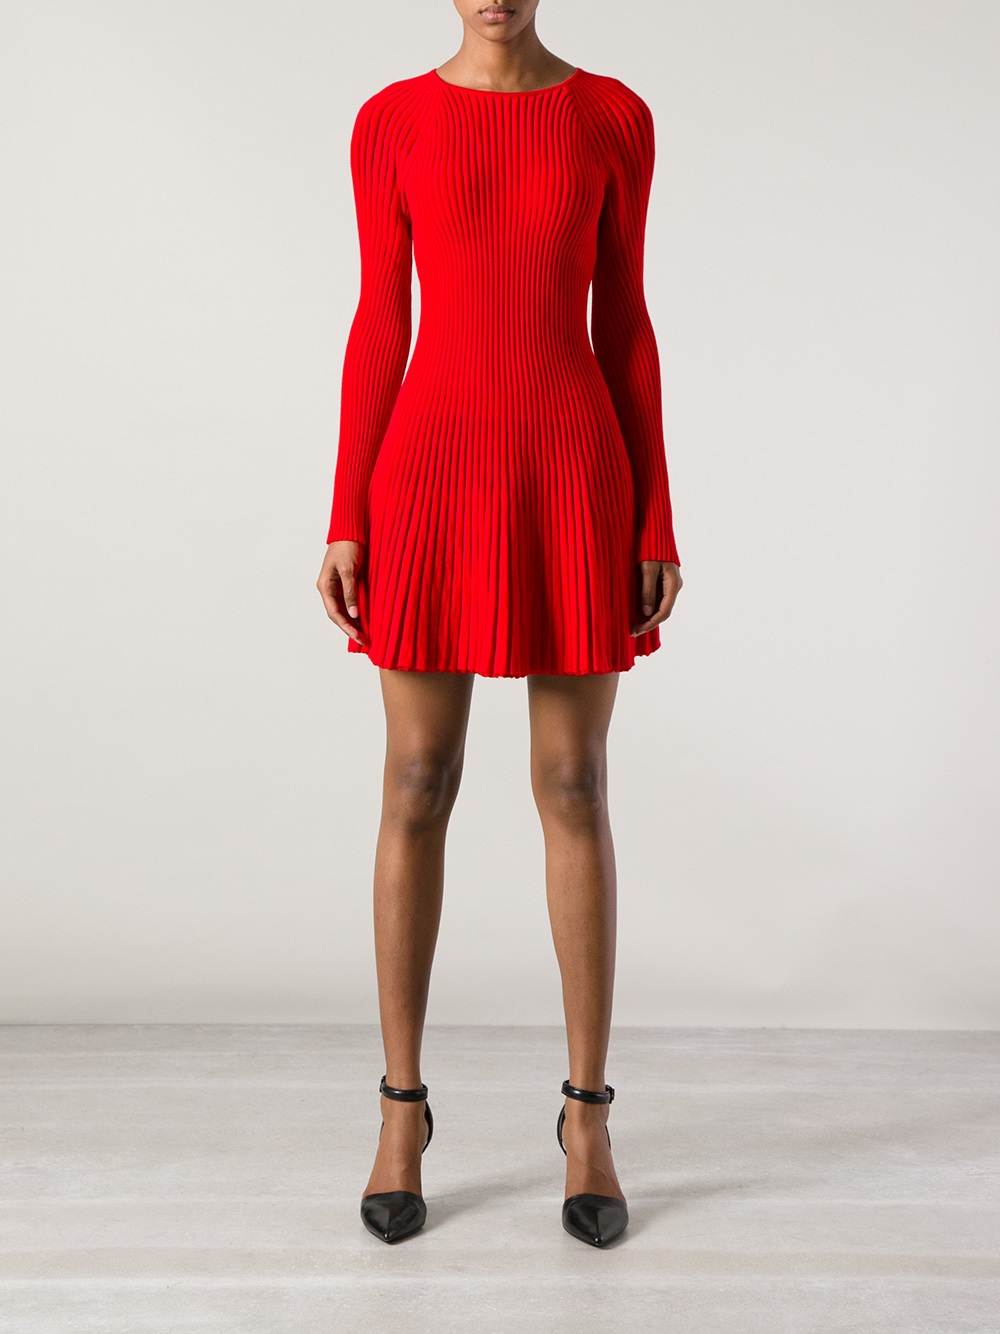 Lyst - Alexander Mcqueen Ribbed Knit Dress in Red